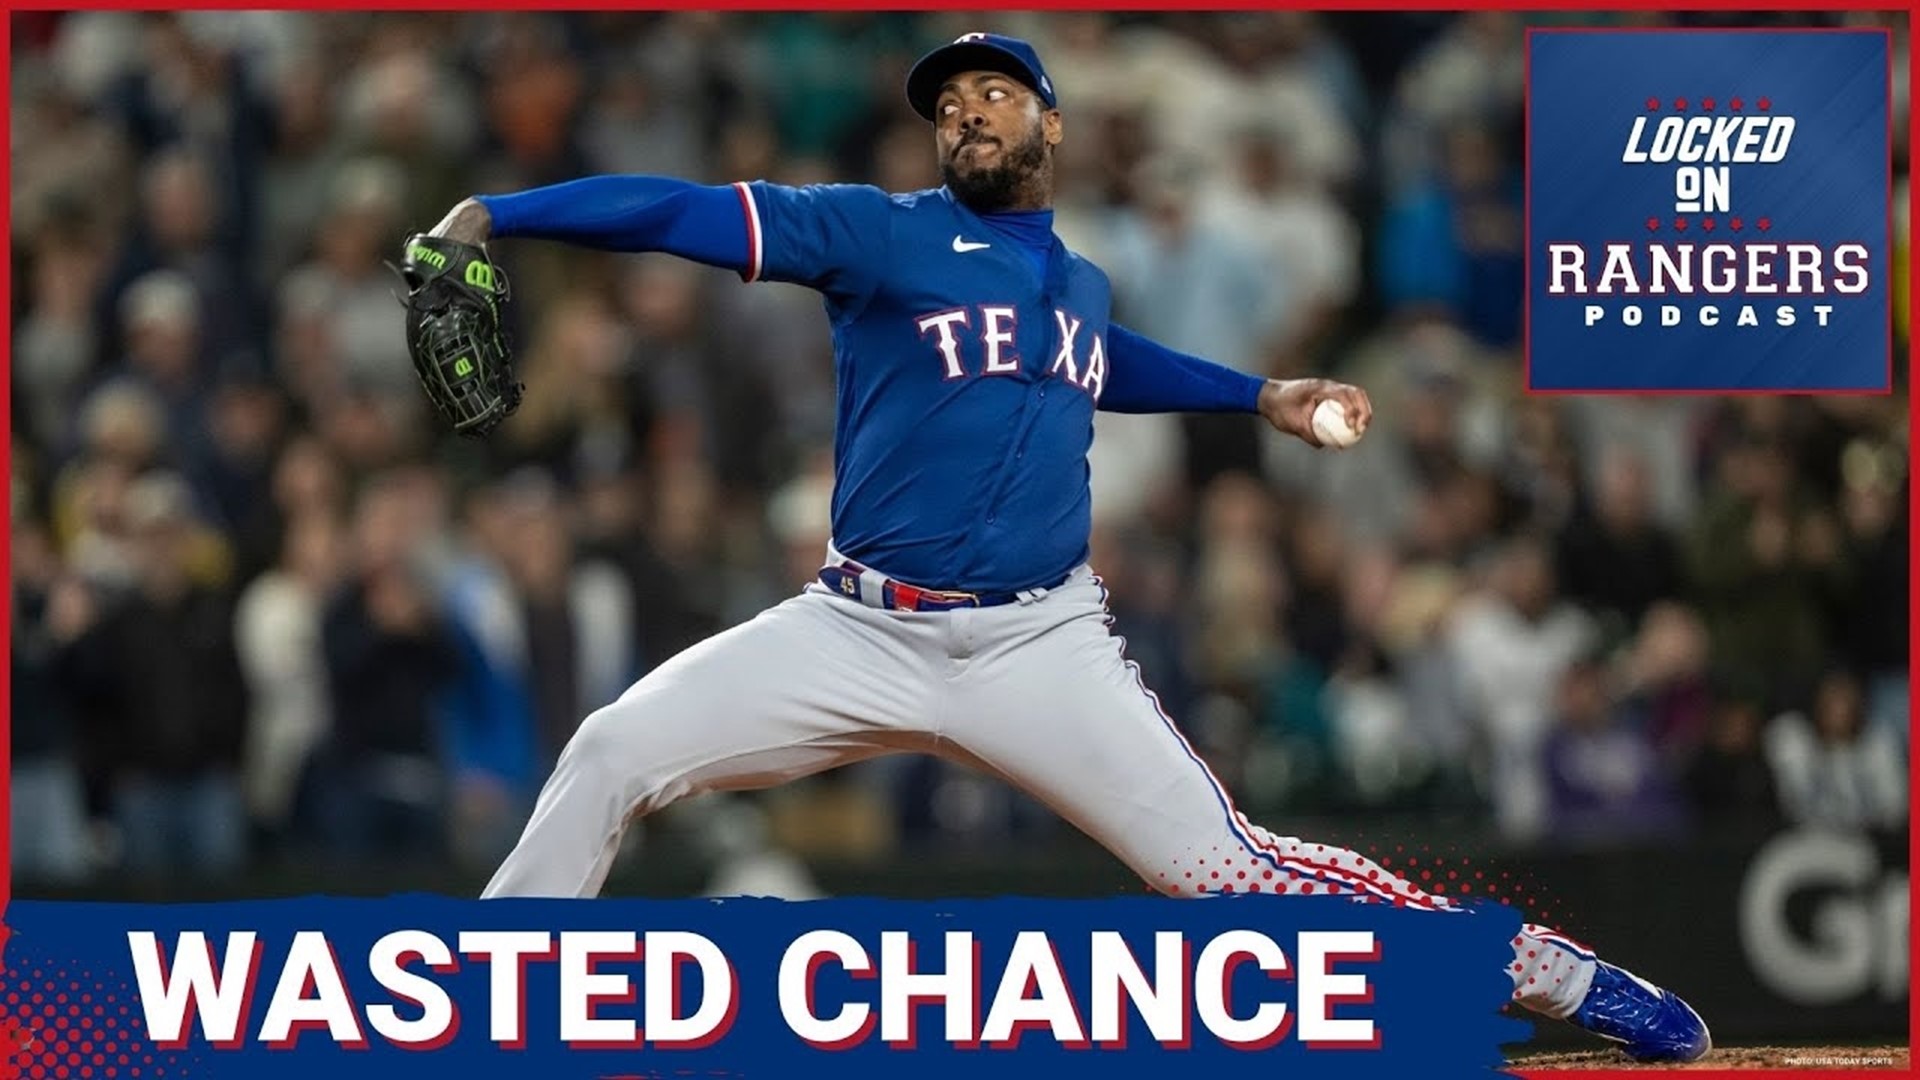 The Texas Rangers bullpen blew another late lead as Aroldis Chapman couldn't get an out, even though Bruce Bochy never should have put him in to begin with.